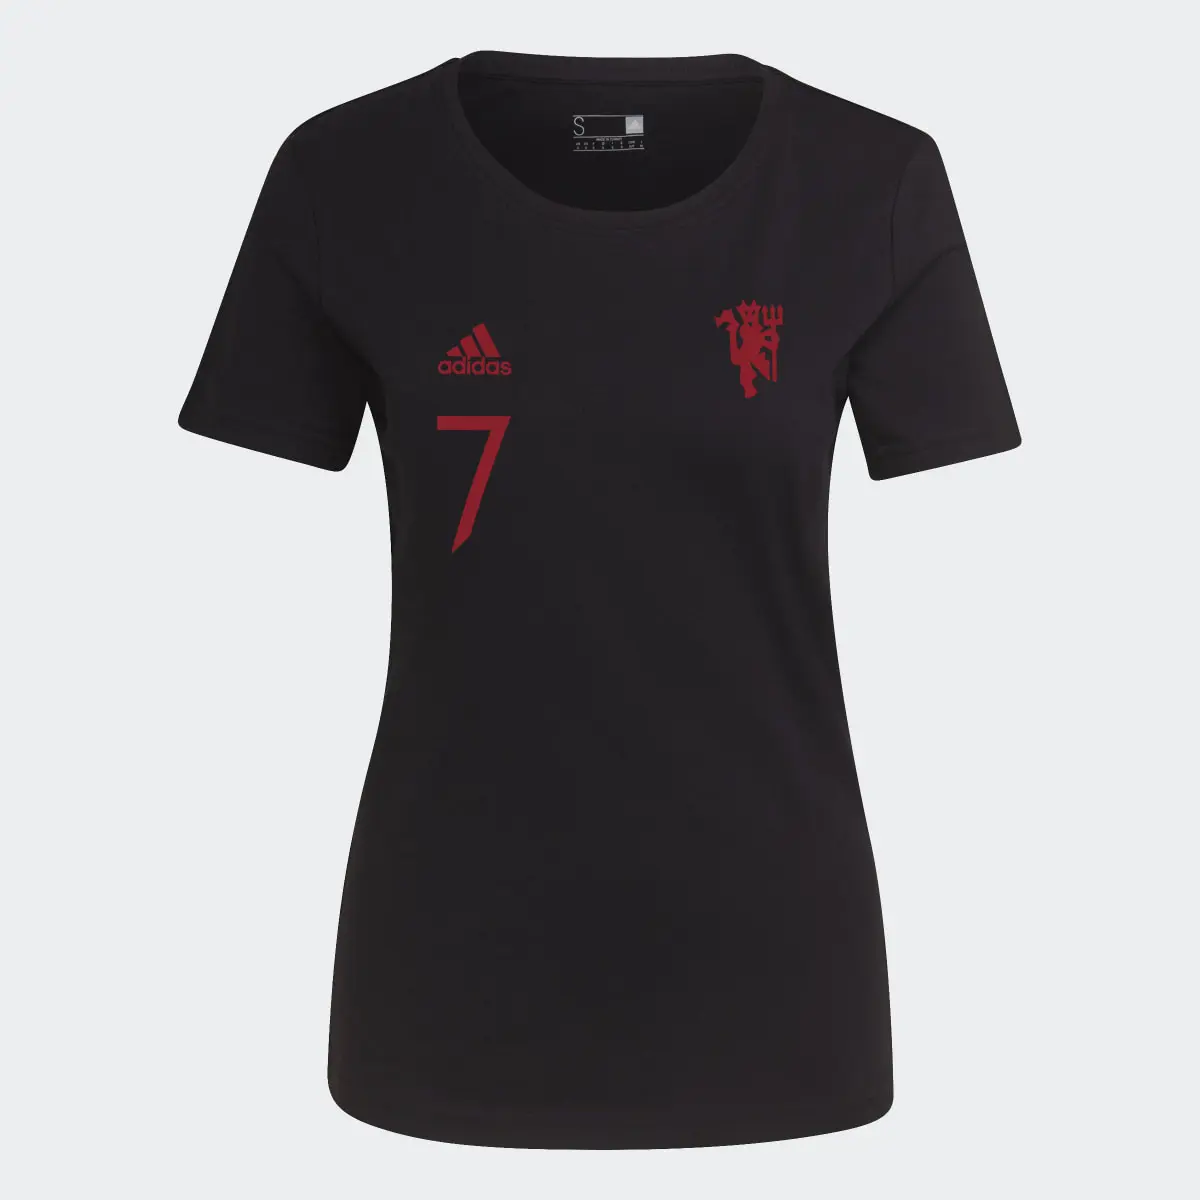 Adidas T-shirt Graphic Manchester United FC. 1